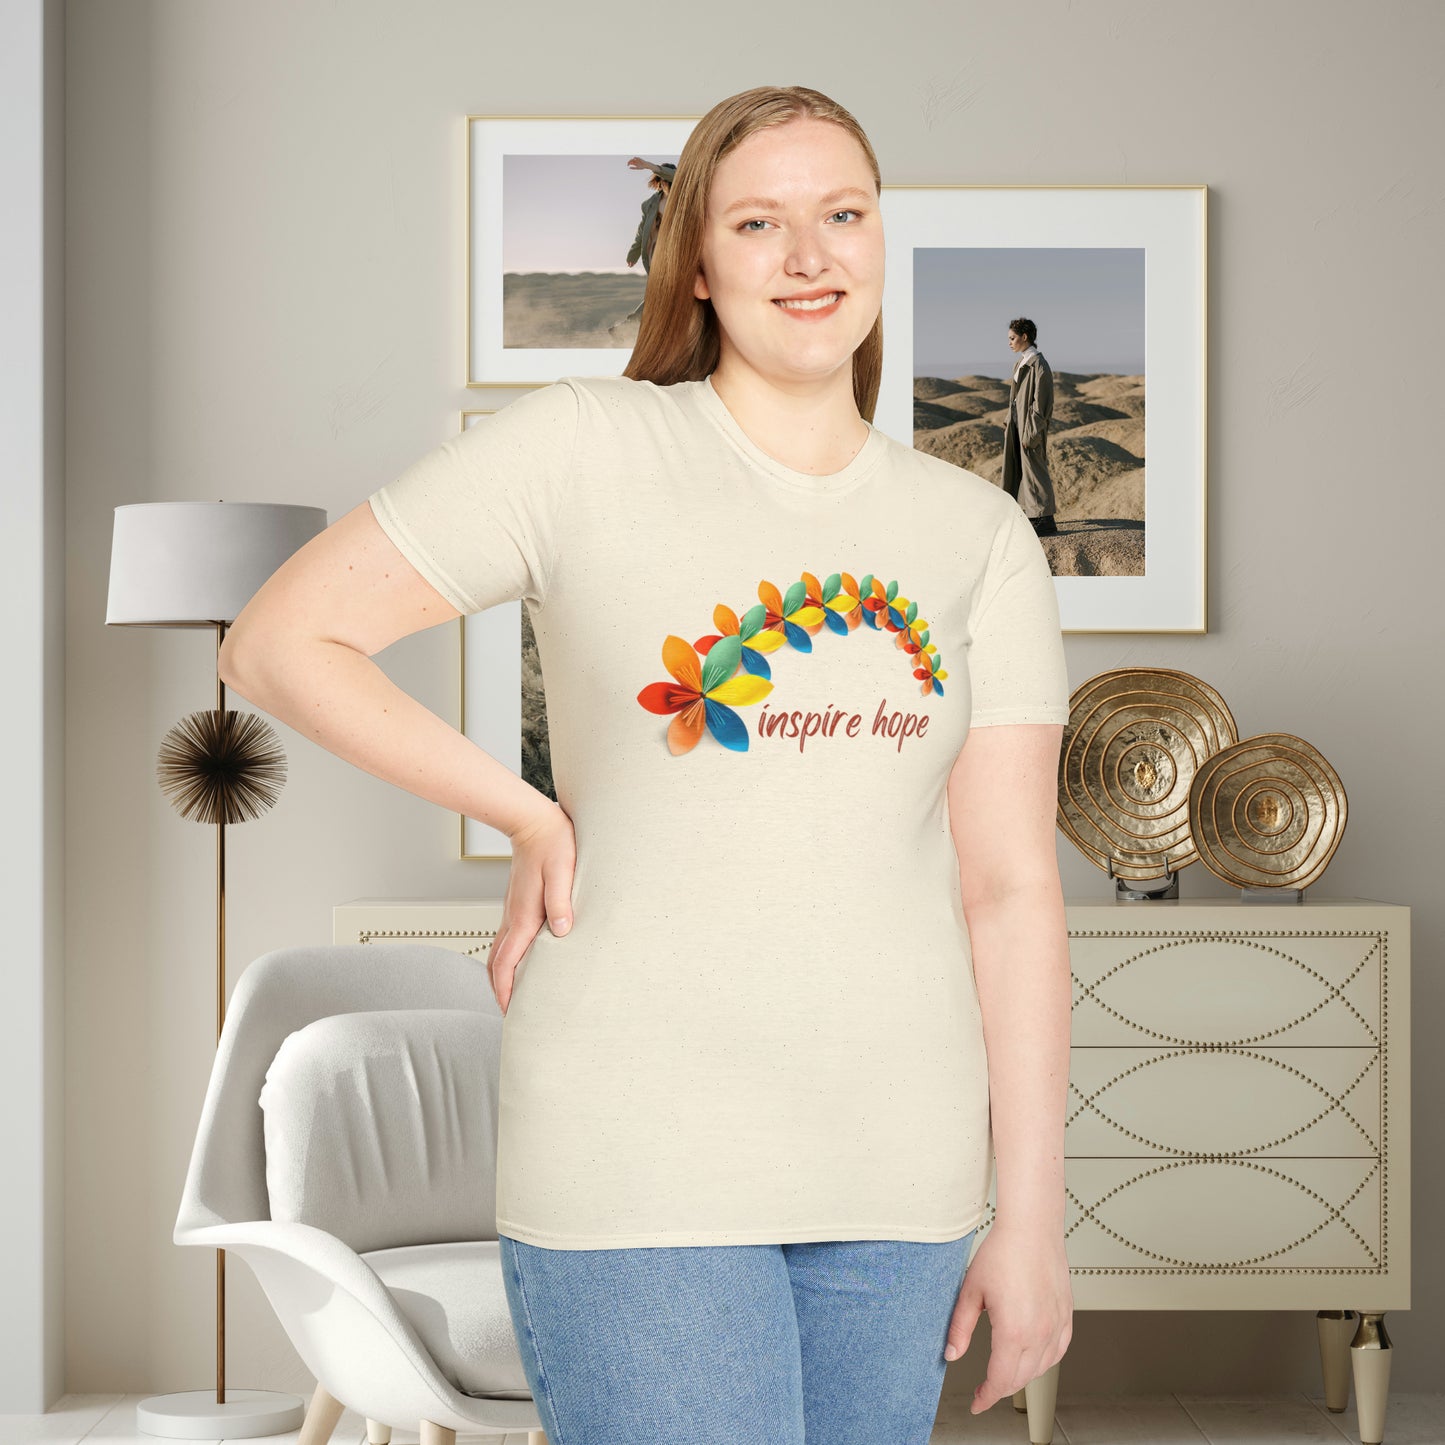 A beautiful origami style flowers in rainbow formation with “inspire hope” below it. We find hope in each other, that is part of our humanity. Be that inspiration, one person at a time. This is a Unisex Softstyle T-Shirt.